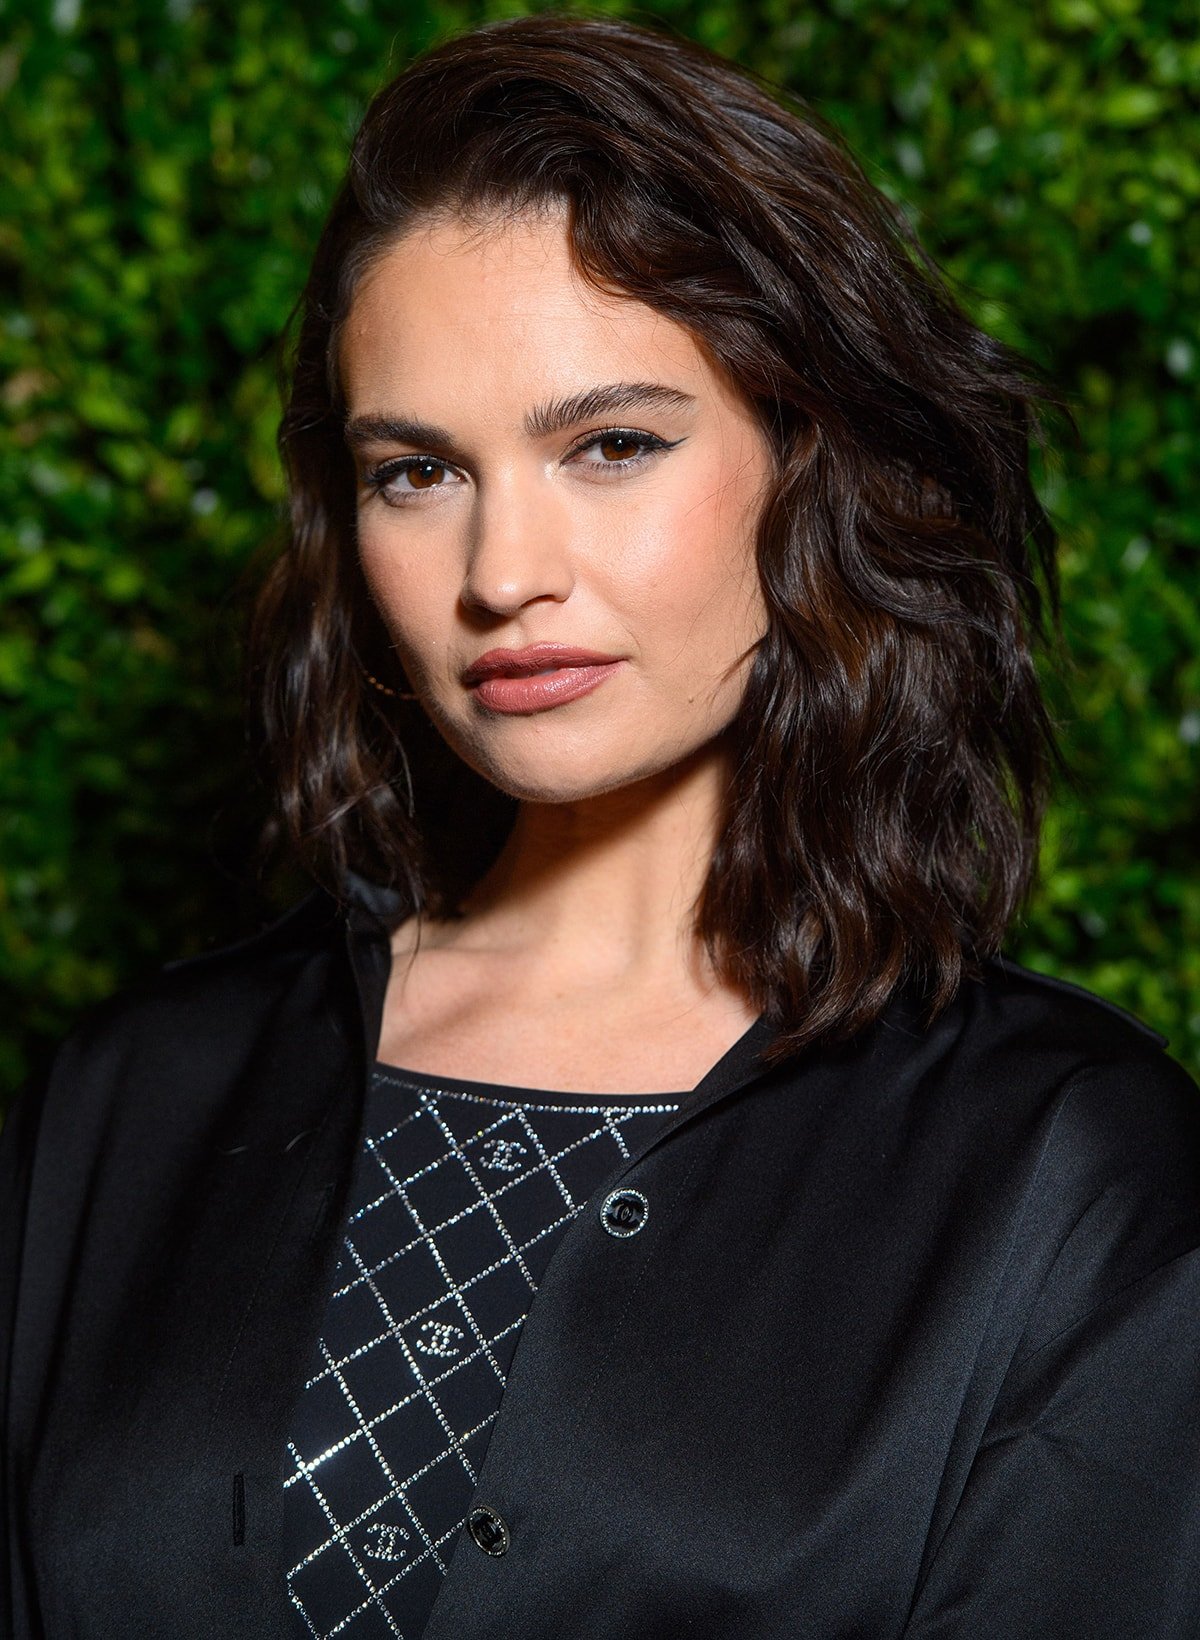 Lily James wears her tresses in side-swept retro curls and defines her features with winged eyeliner, rosy blush, and matching lip color